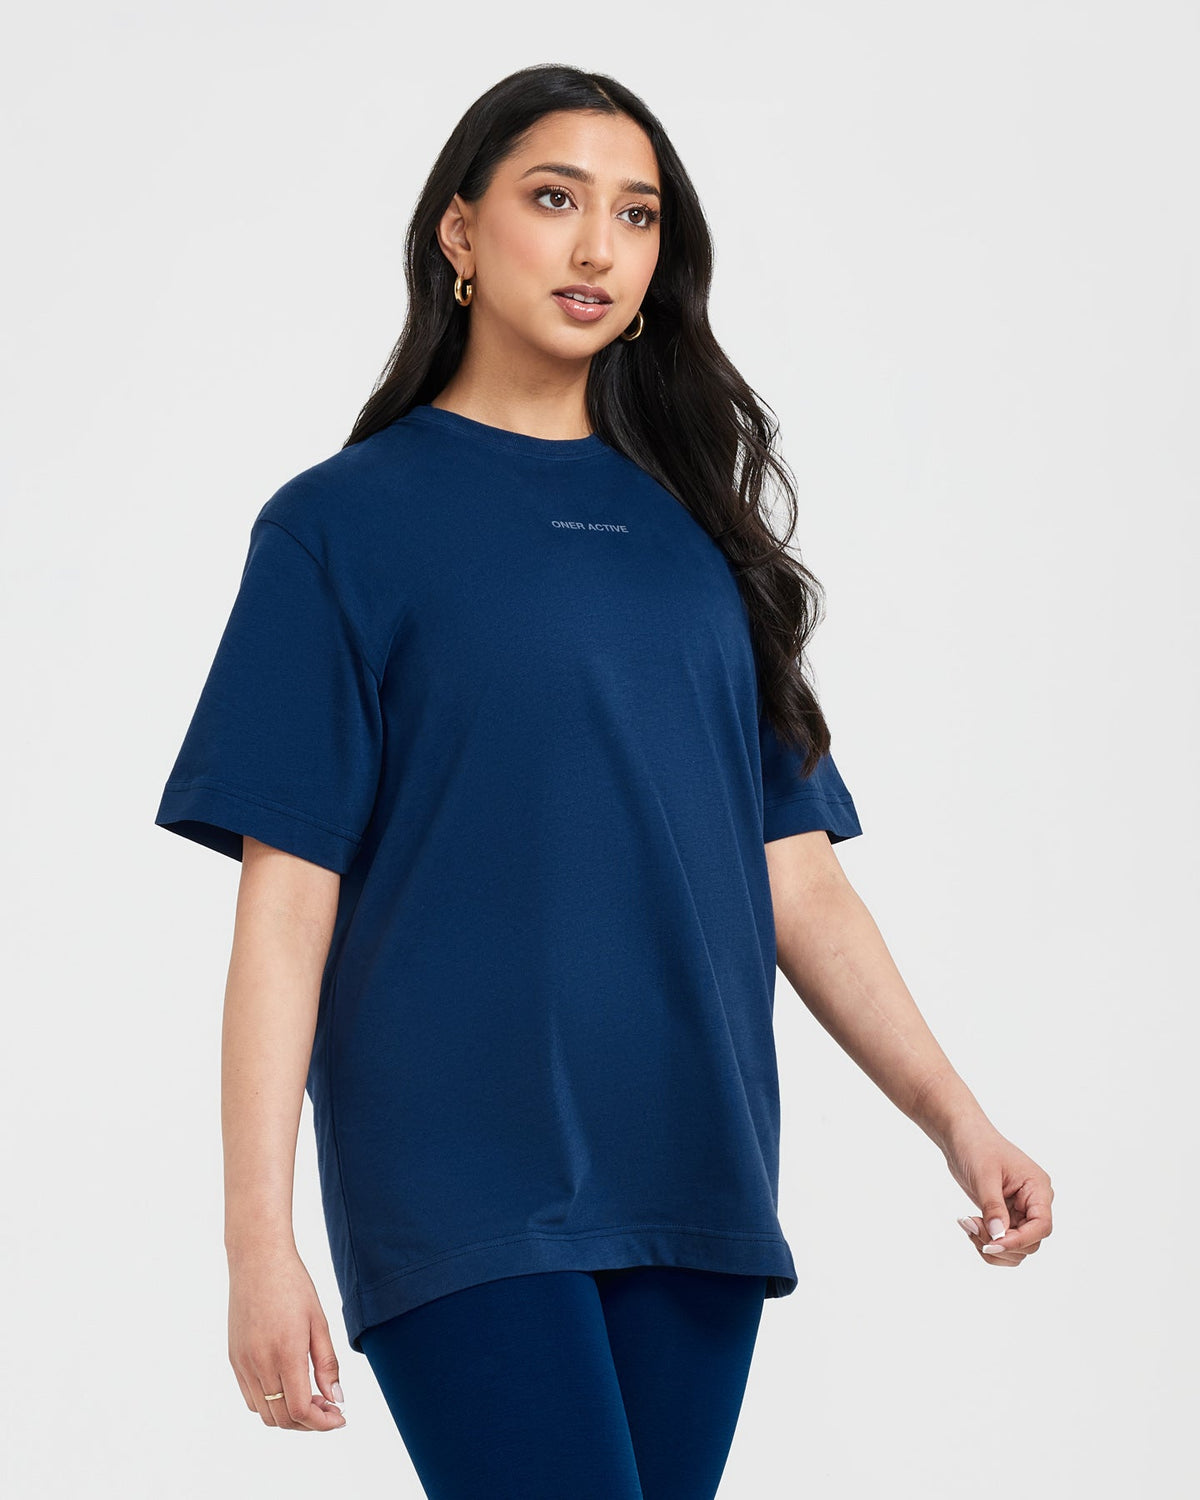 Oversized Graphic T-Shirts for Women | Oner Active | T-Shirts